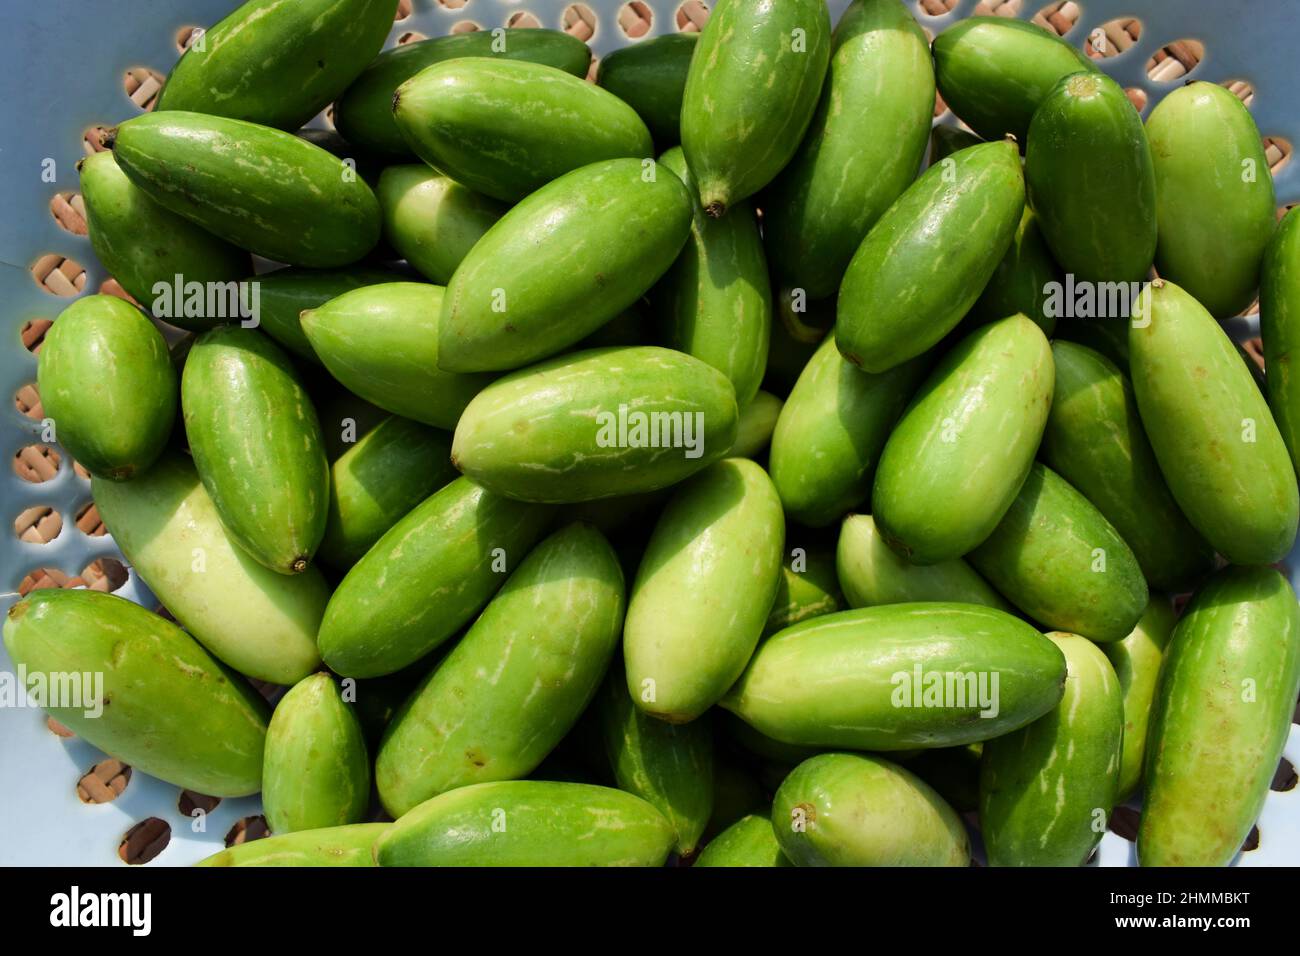 Big size Ivy gourds in basket. Green vegetables authentic India grown Tindora or Tinde fresh organic vegetables in basket. Stock Photo